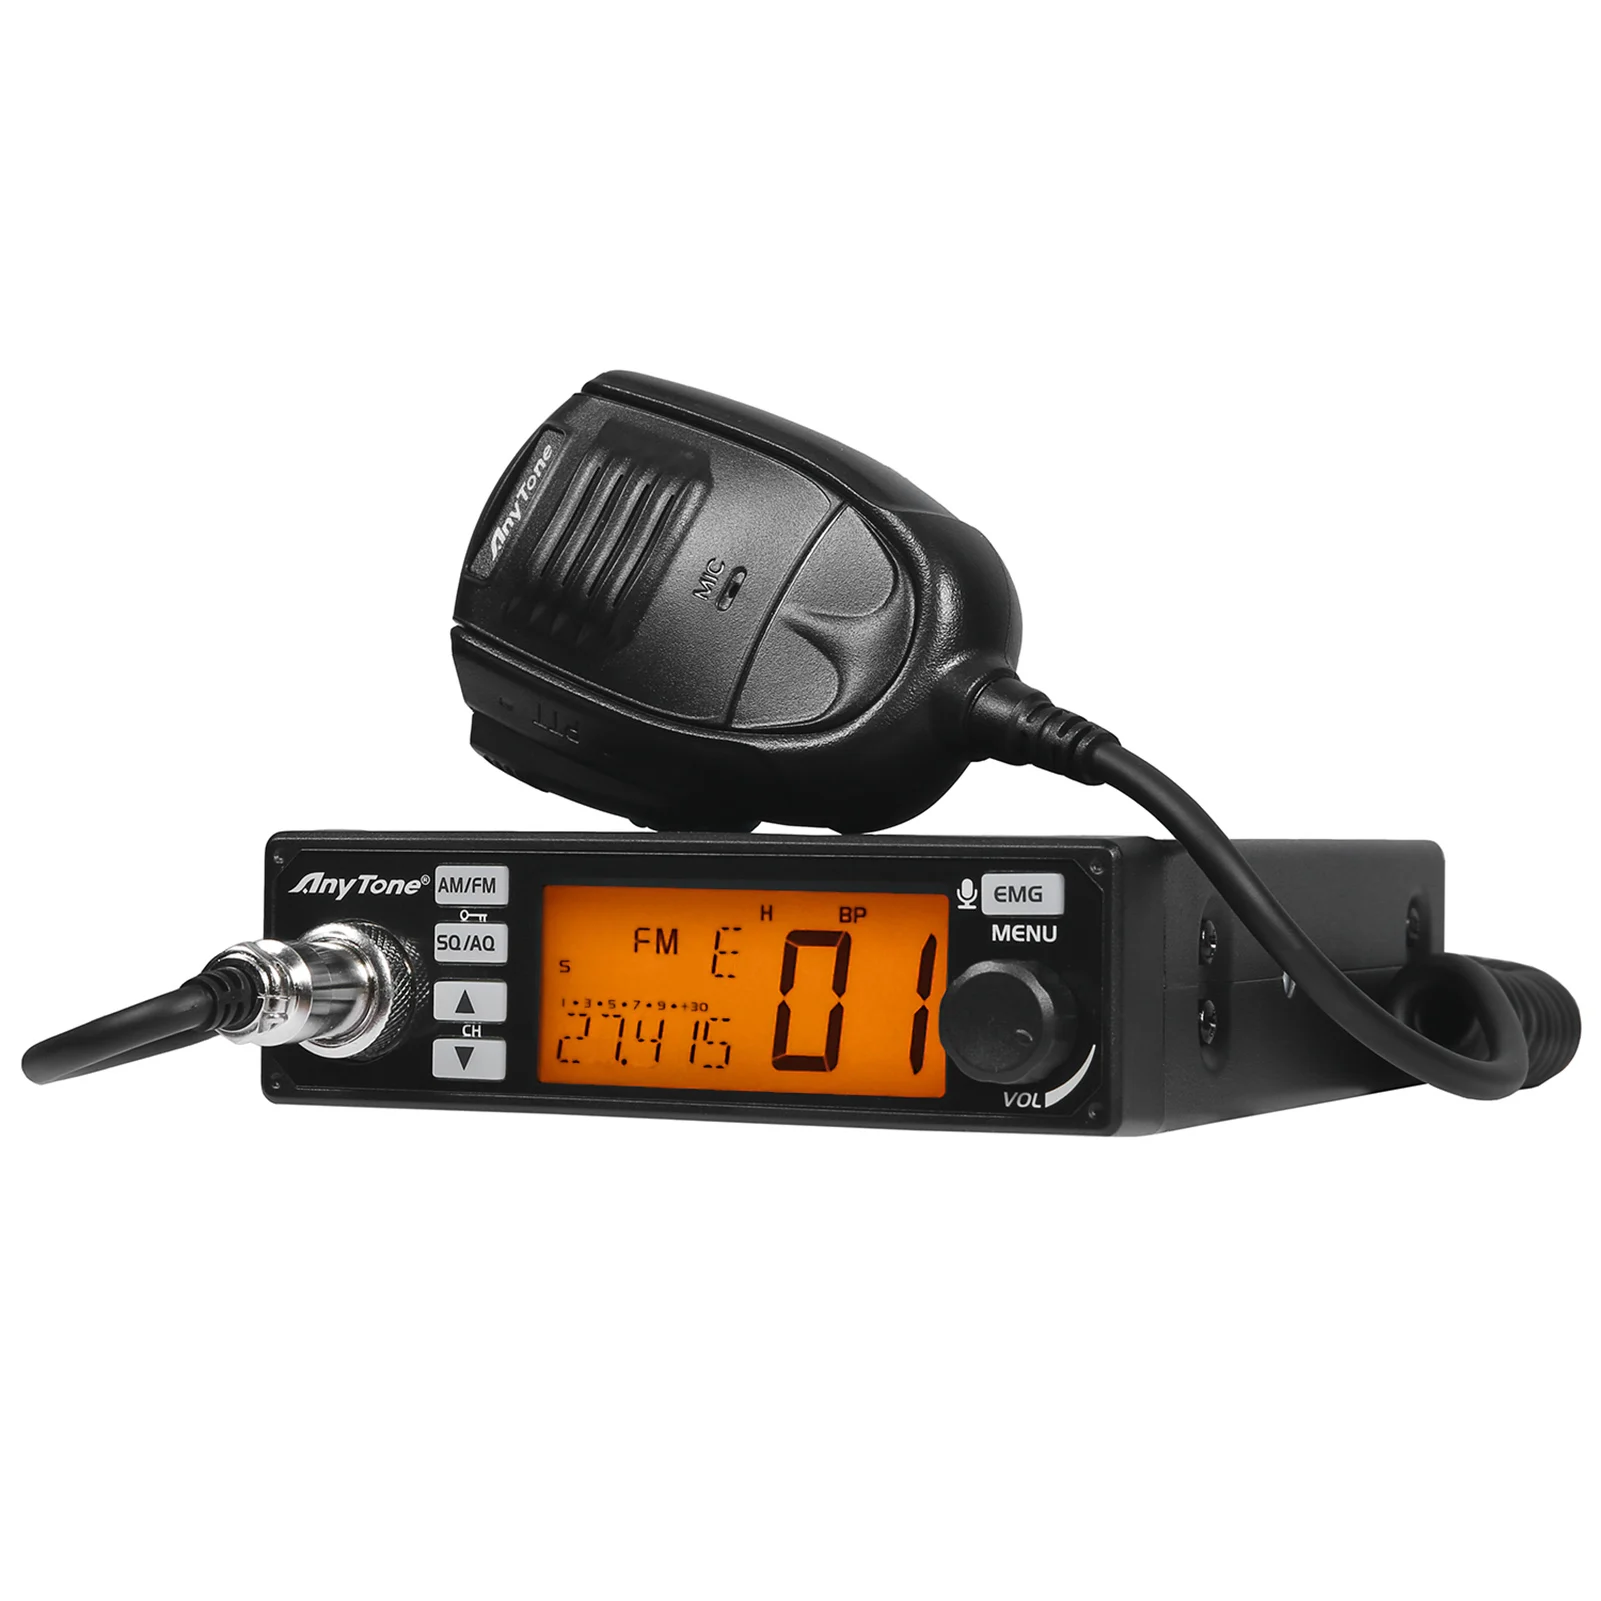 

10 Meter Radio AnyTone AT-500M 24.715-30.105MHz 15W CB Radio with AM/FM/PA Mode Emergency Channels High Power Output